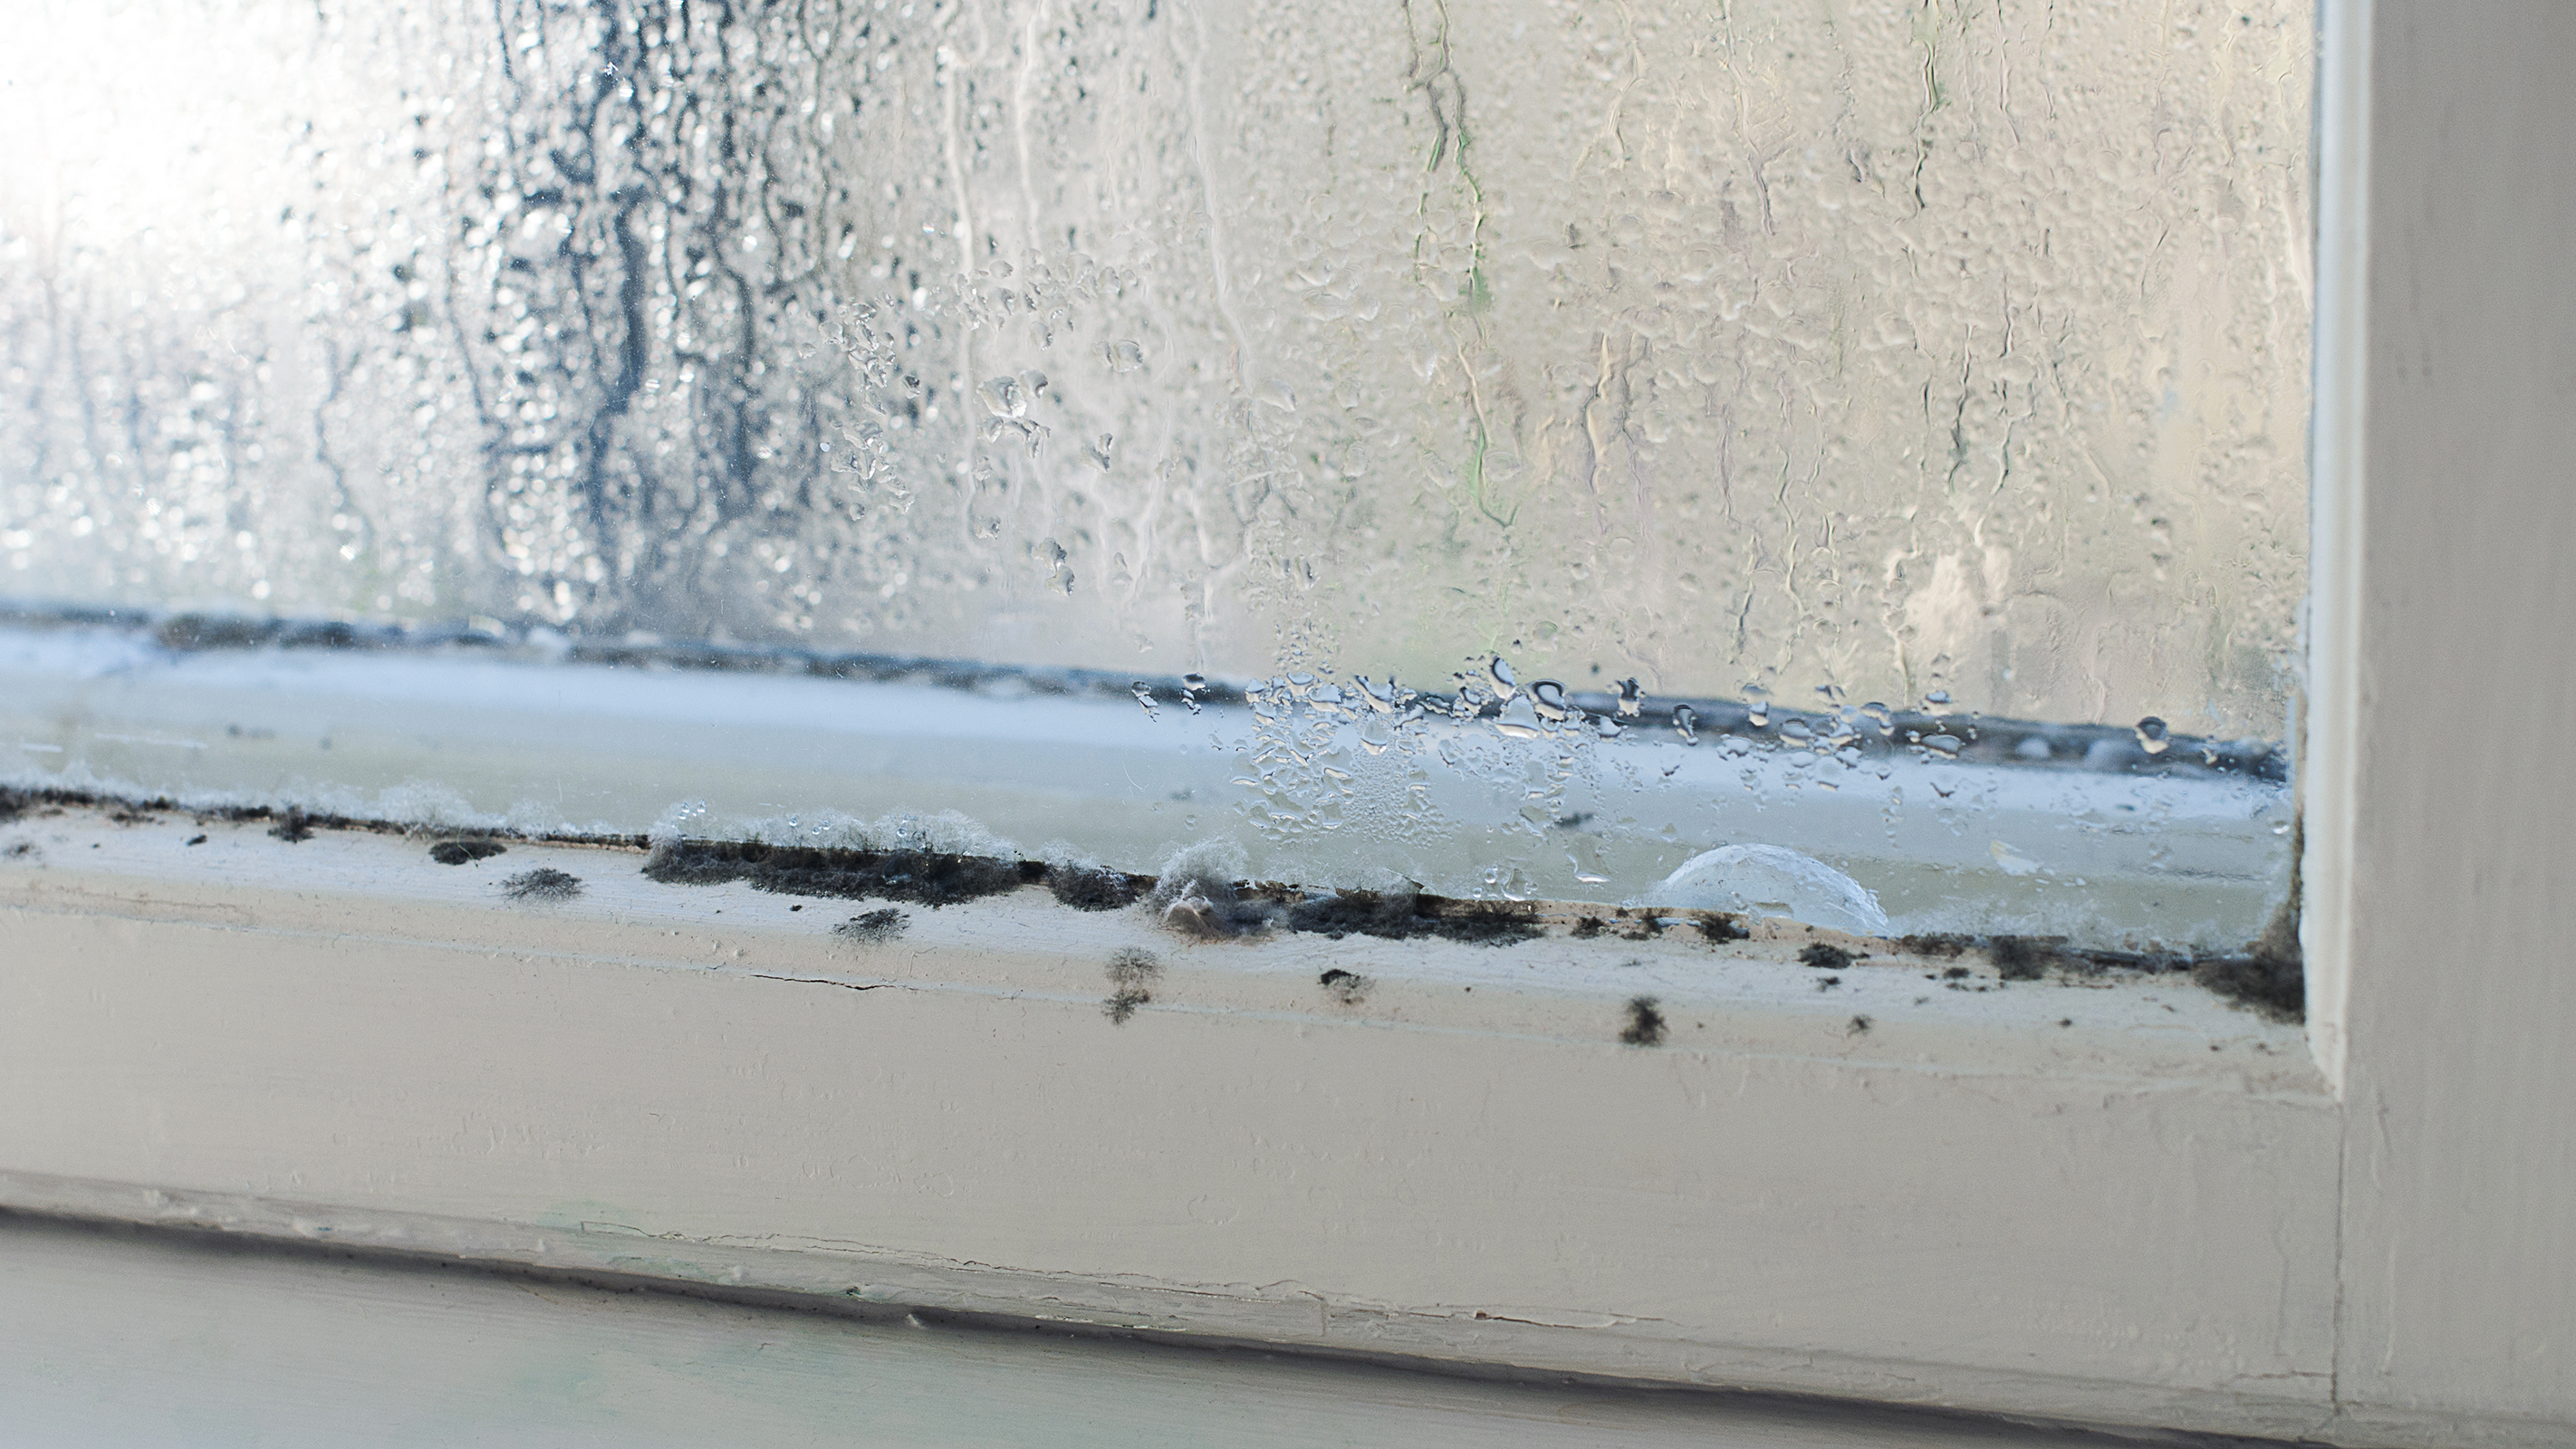 How to prevent window condensation? : r/howto